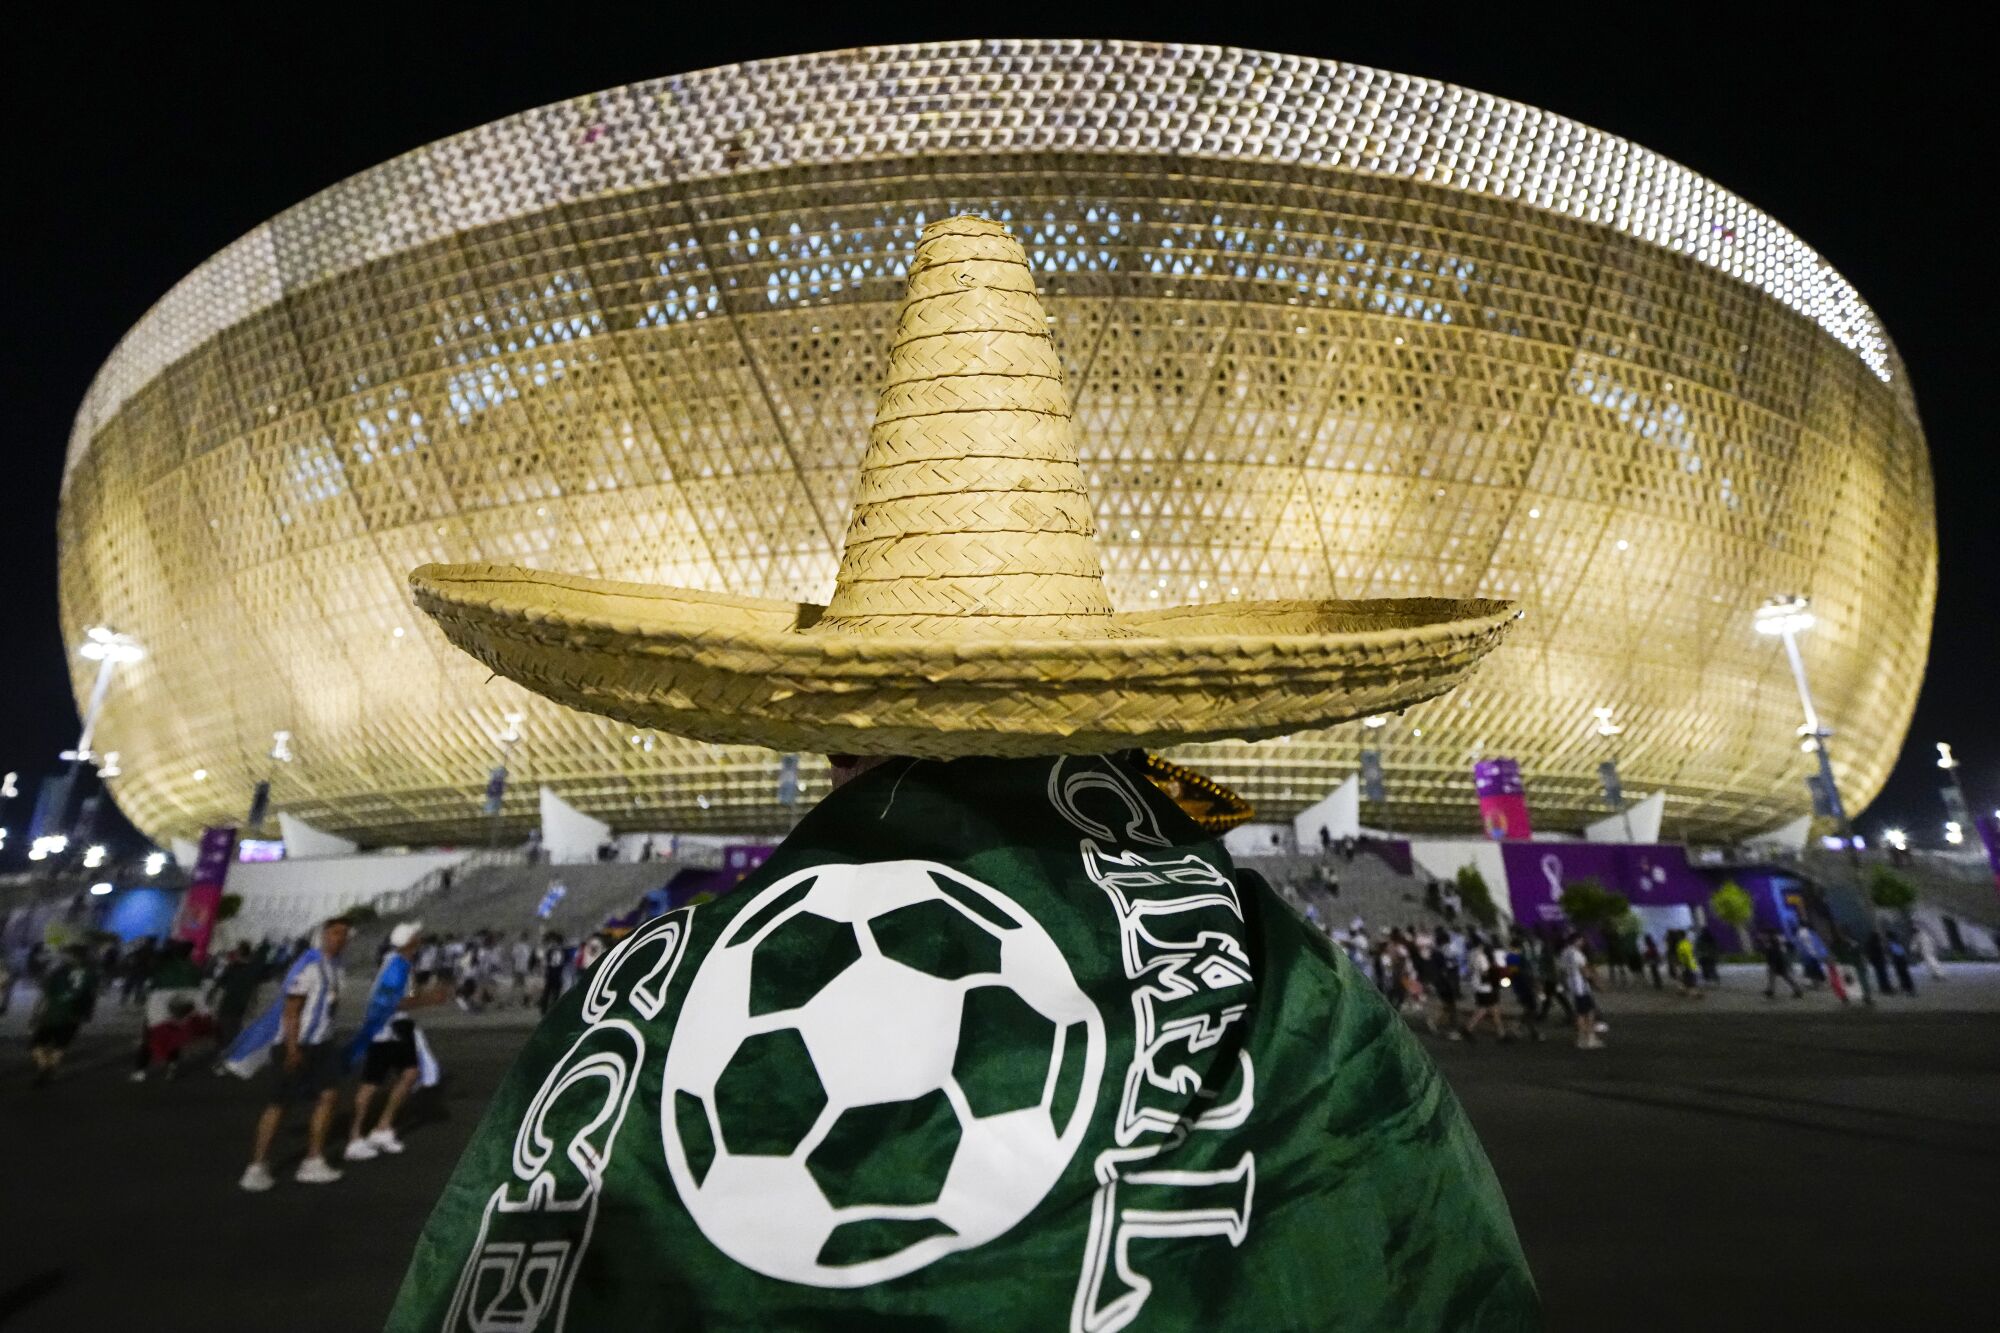 A Mexico's fan wearing a sombrero walks towards the Lusail Stadium.